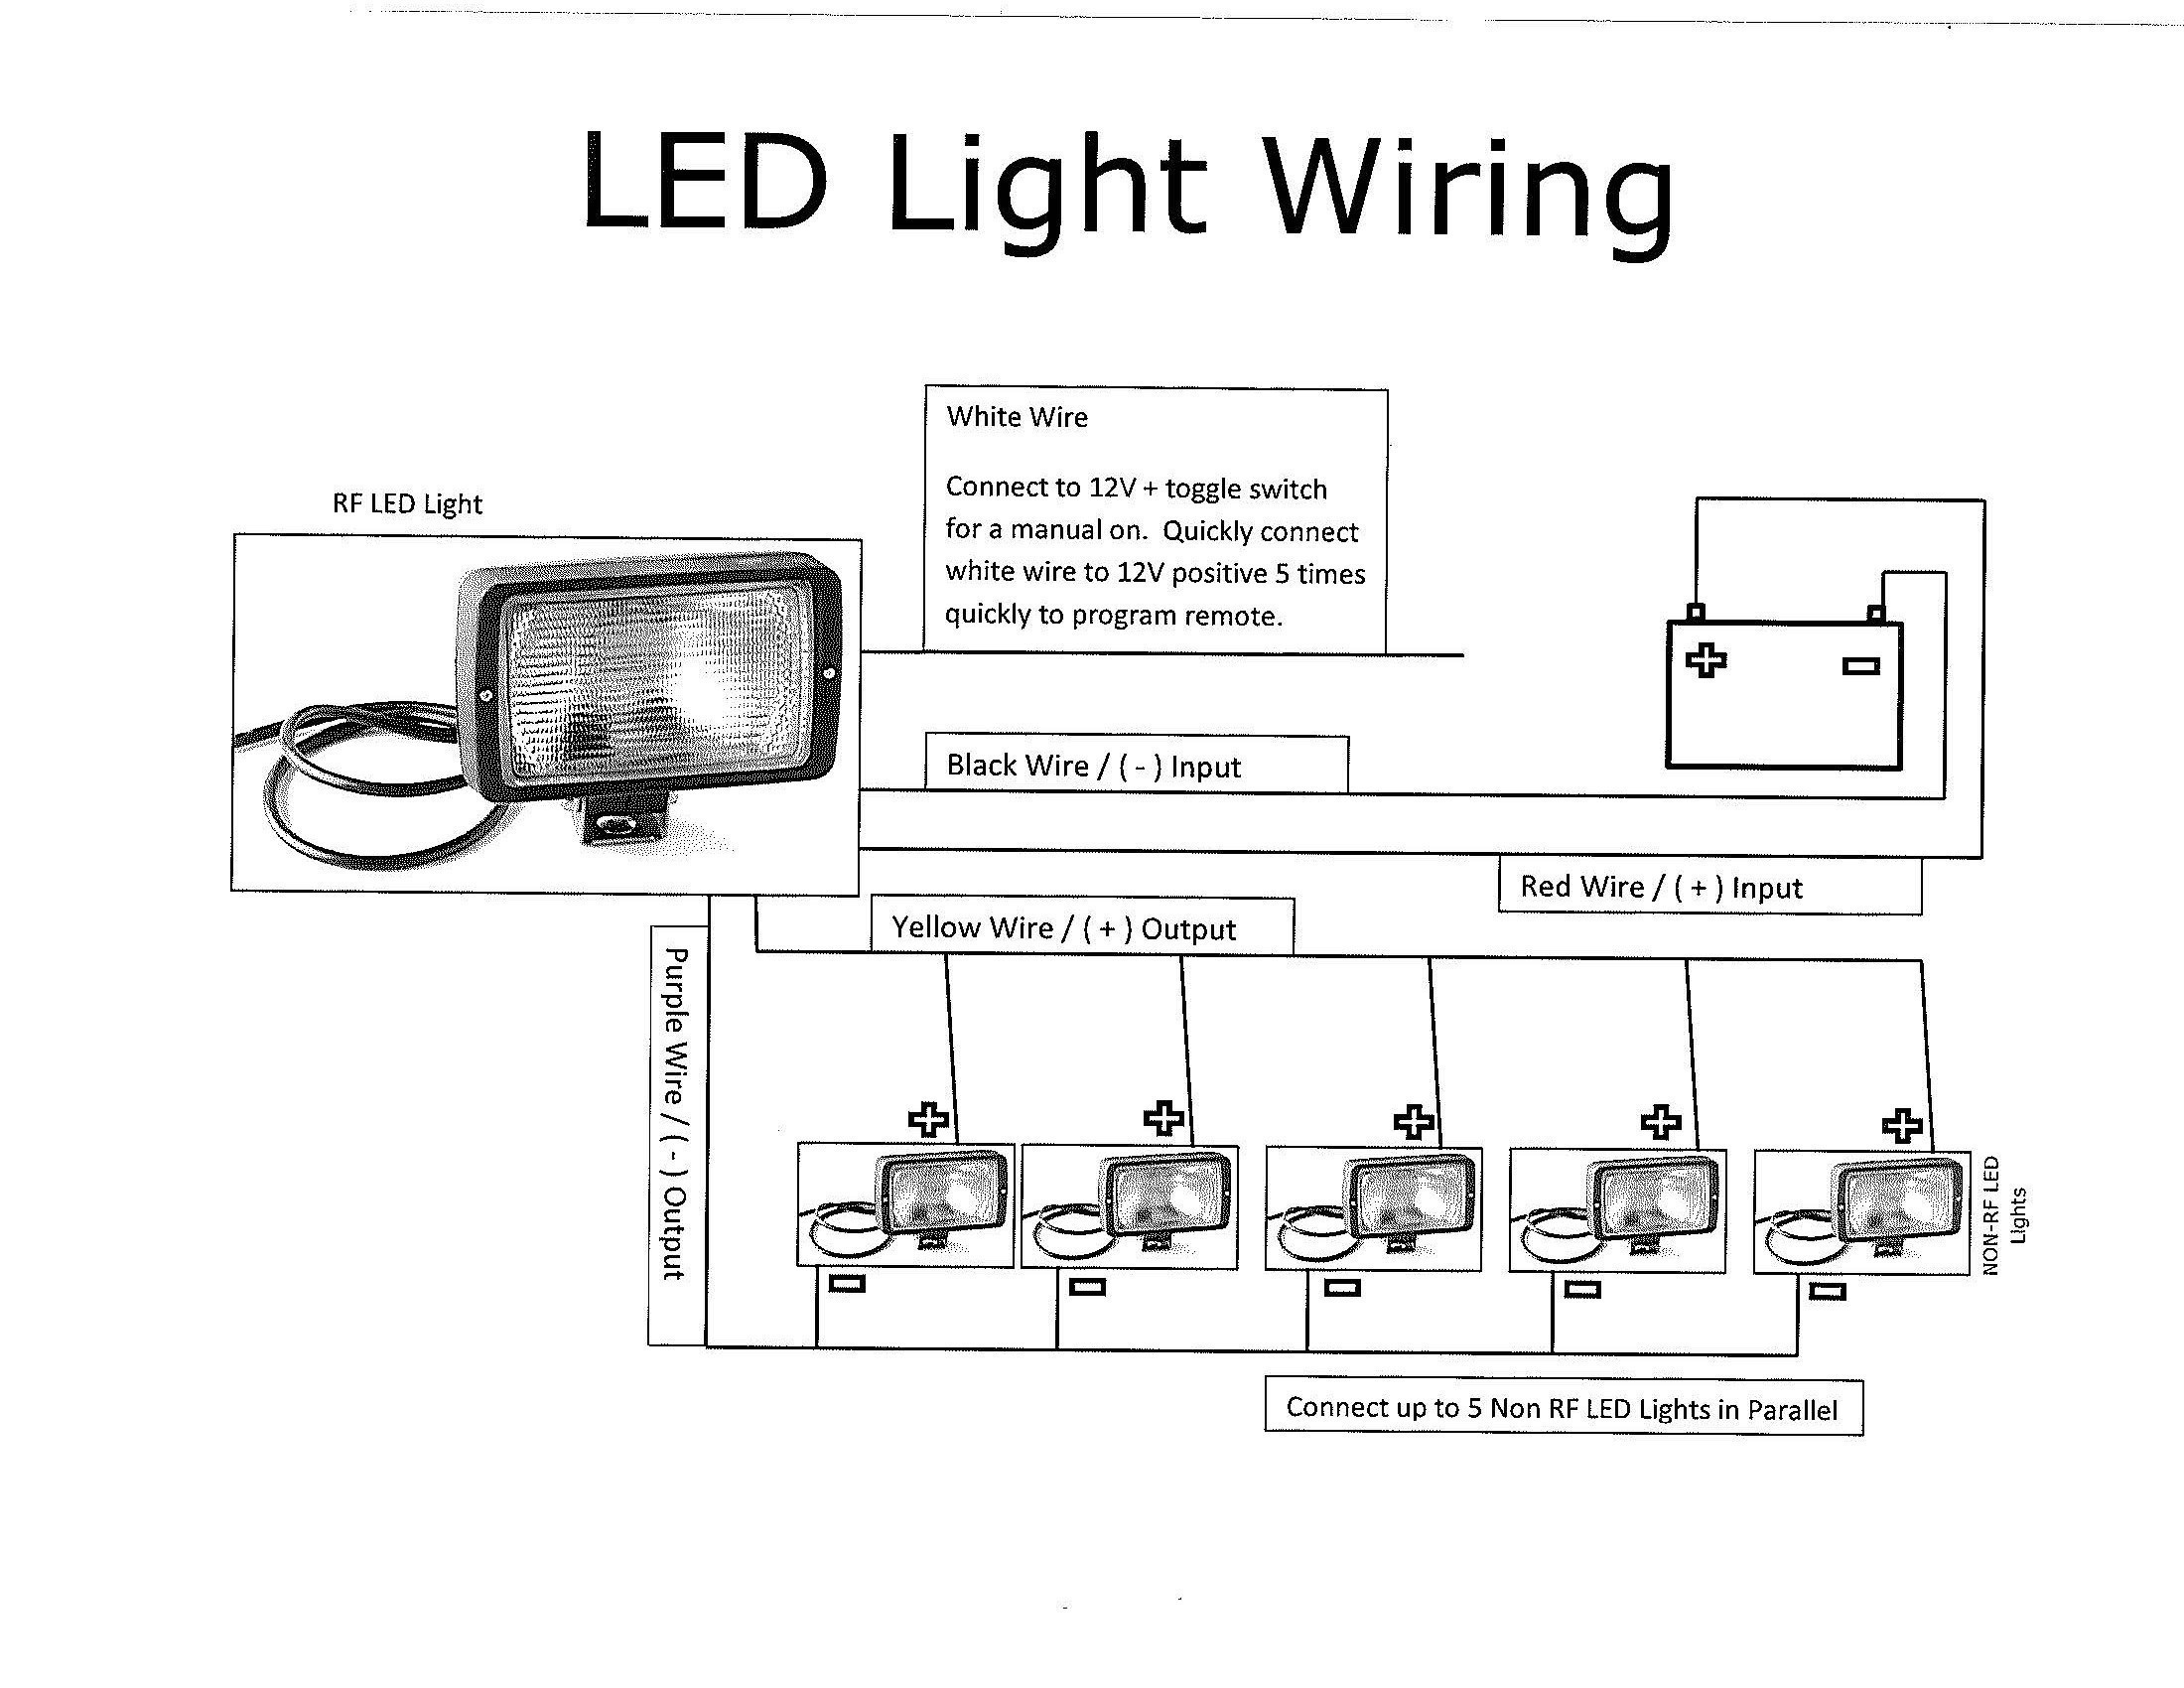 Wiring Diagram for Light and Switch Save Peerless Light Switch Wiring Diagram Multiple Lights Image 0d